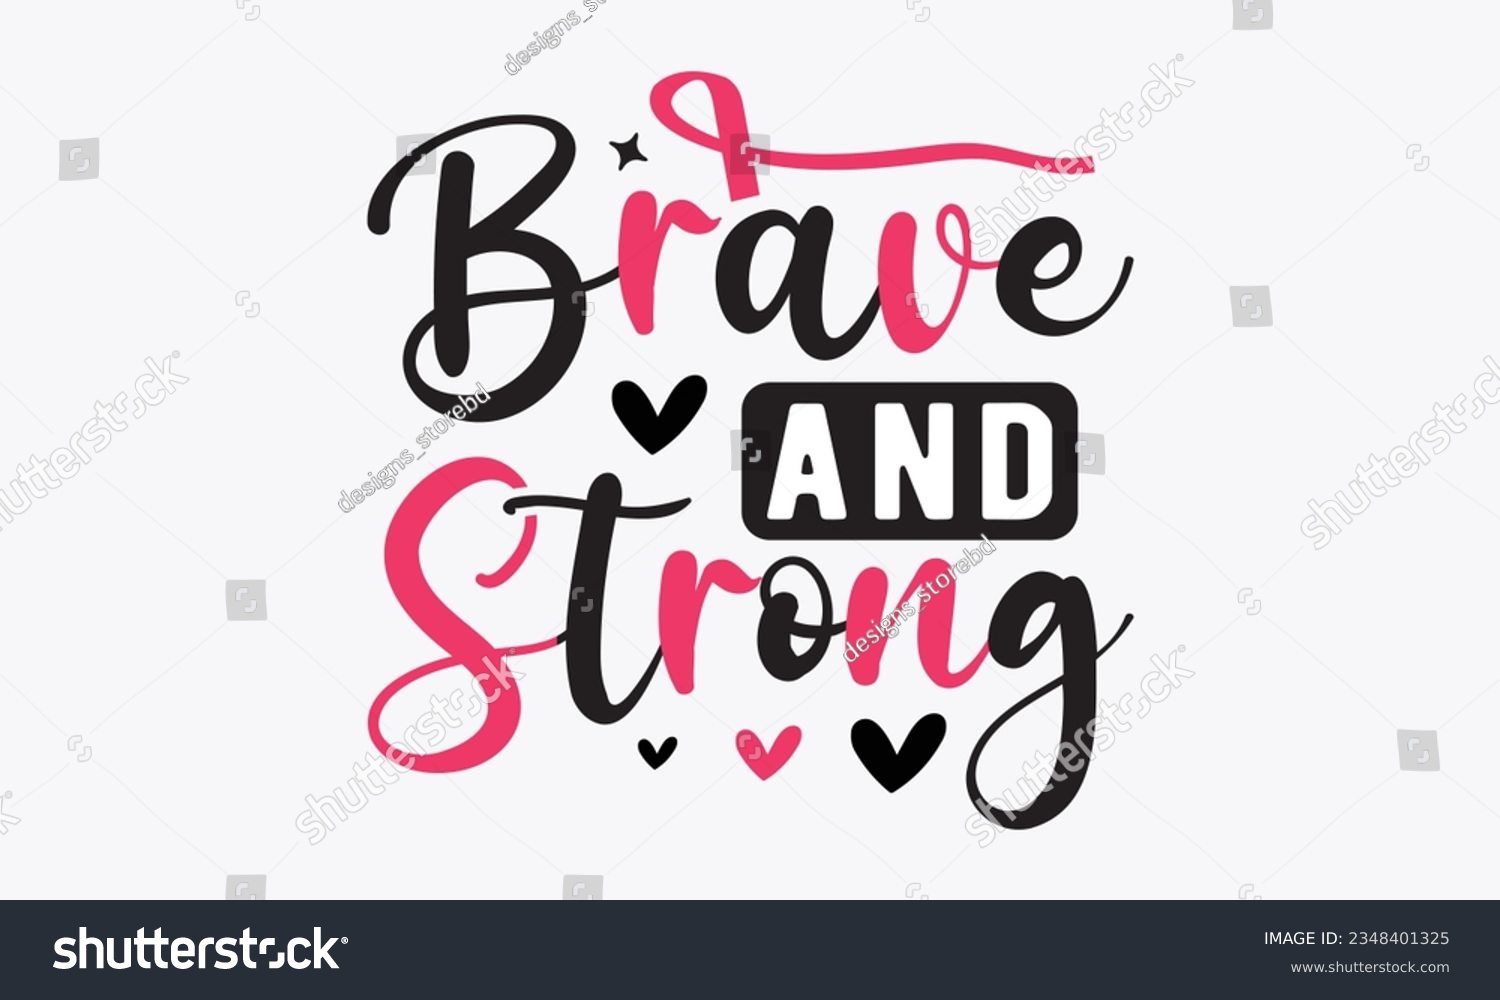 SVG of Brave and strong svg, Breast Cancer SVG design, Cancer Awareness, Instant Download, Breast Cancer Ribbon svg, cut files, Cricut, Silhouette, Breast Cancer t shirt design Quote bundle svg